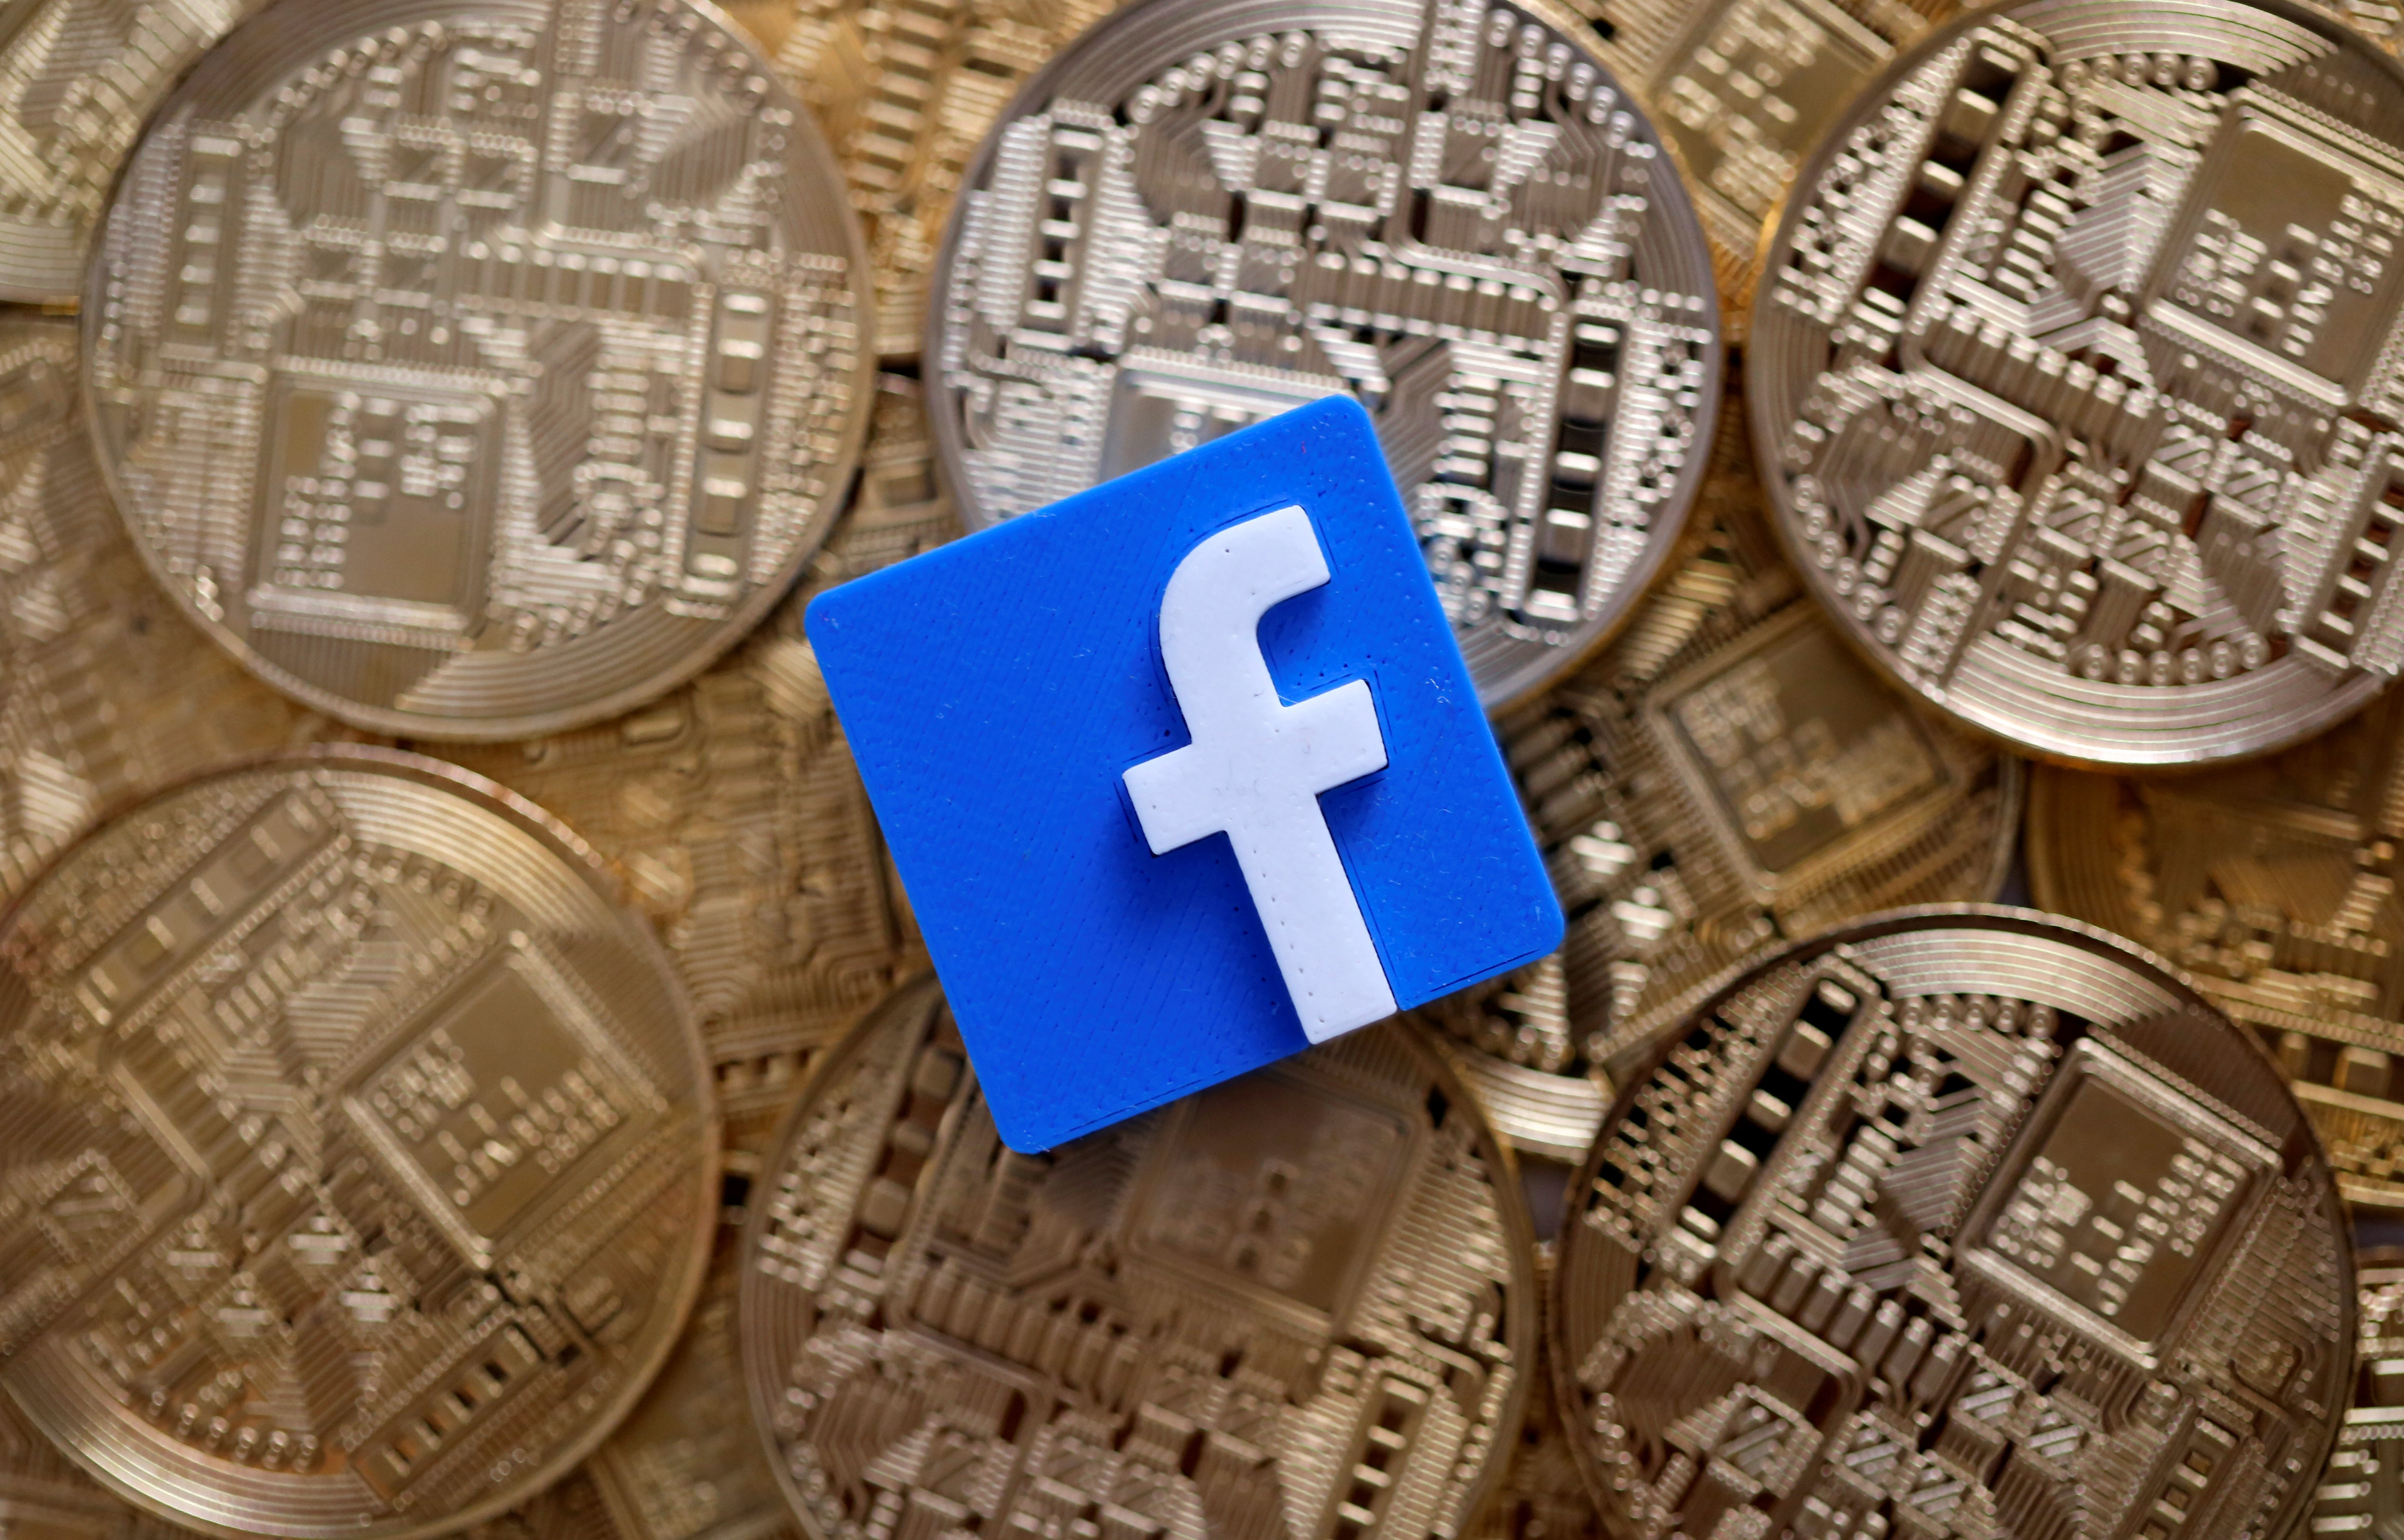 An illustration picture with a 3D printed Facebook logo on top of representations of the bitcoin virtual currency. Photo: Reuters